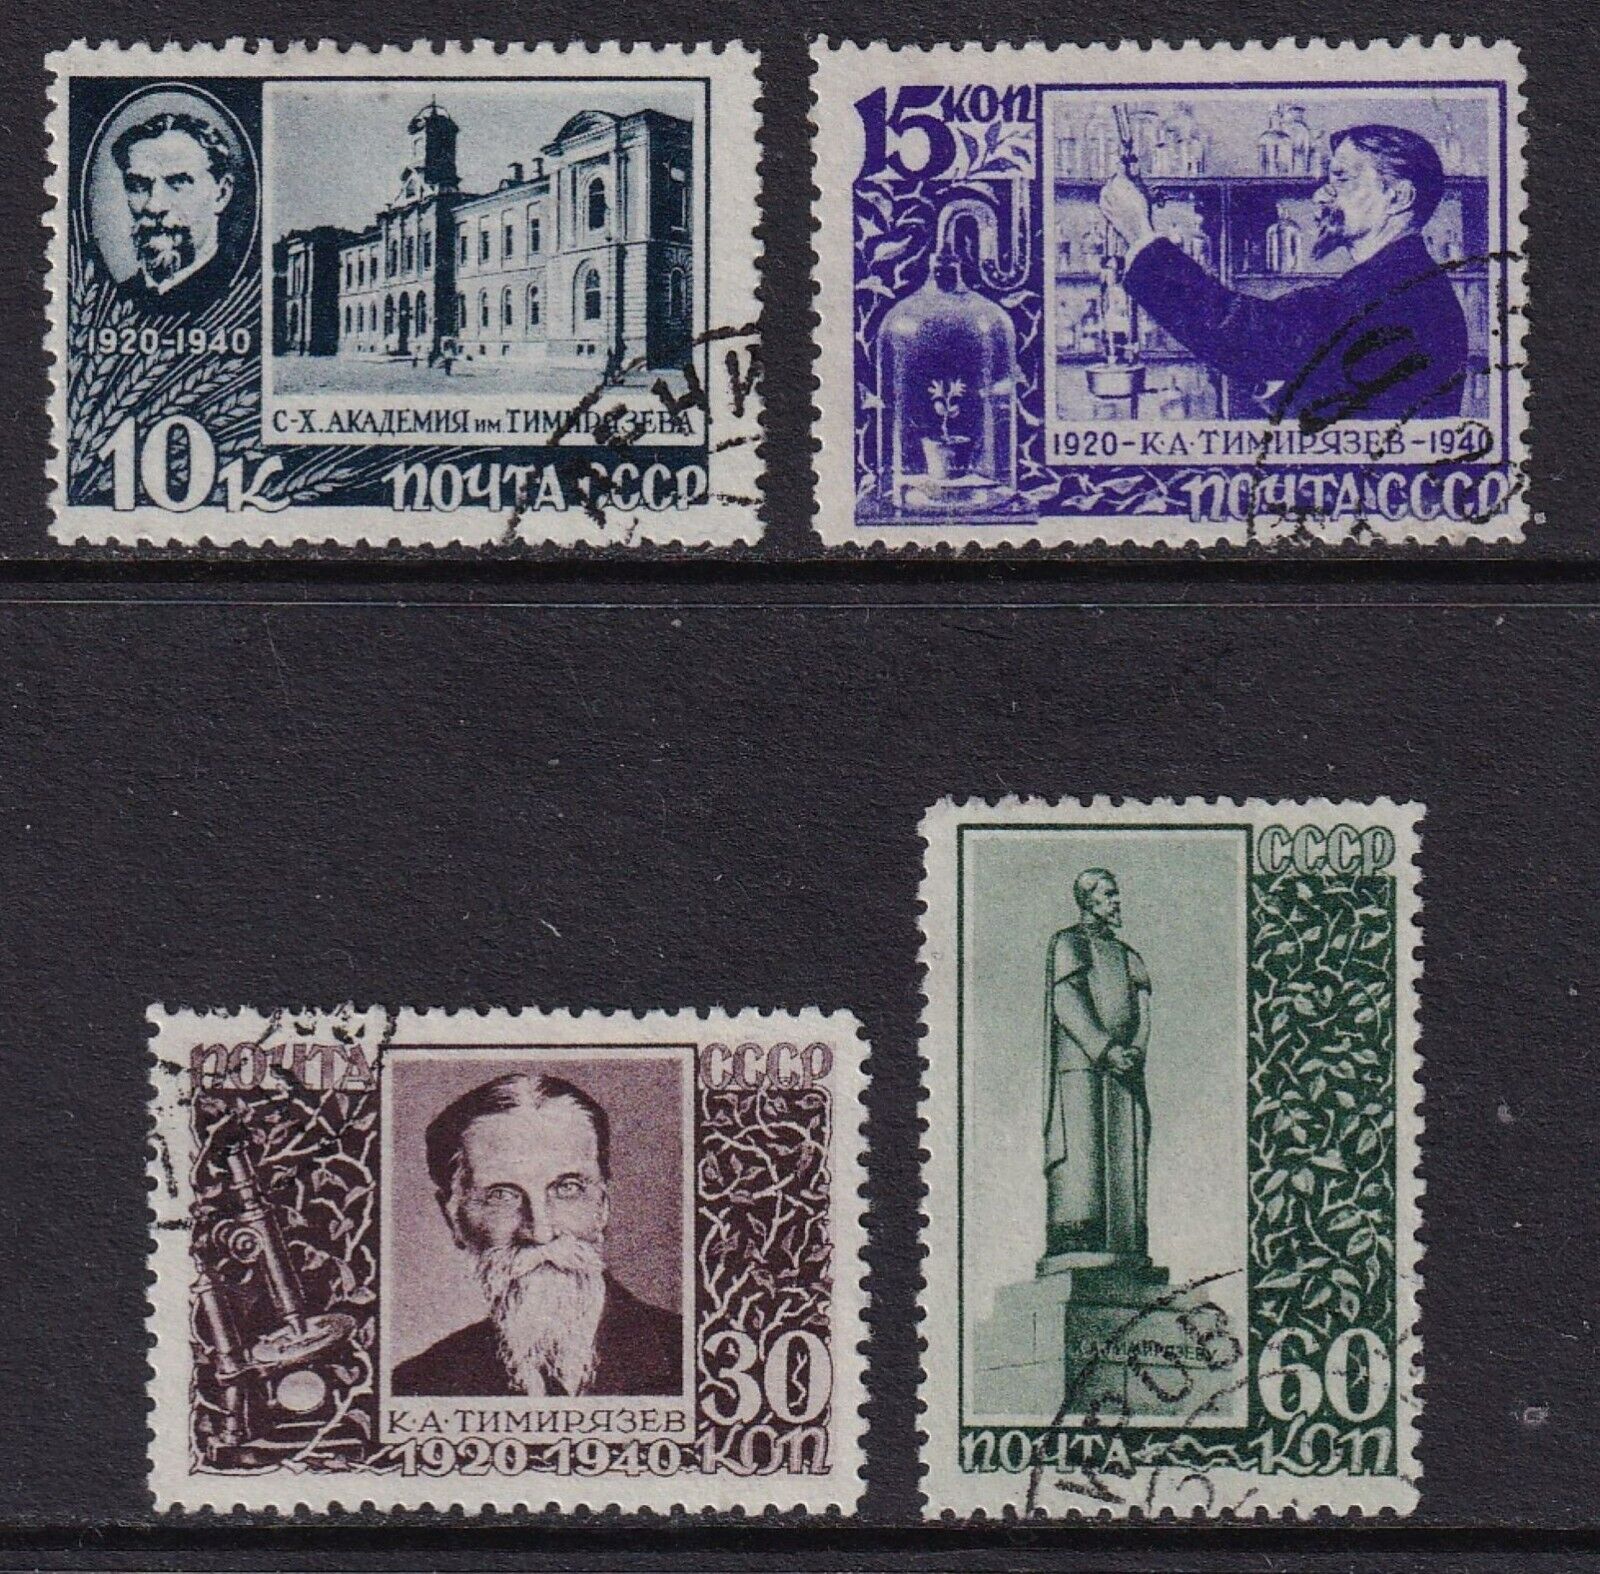 RUSSIA 1940 K. A. Timiryazev set of 4 SG 906-909 Used - Picture 1 of 1